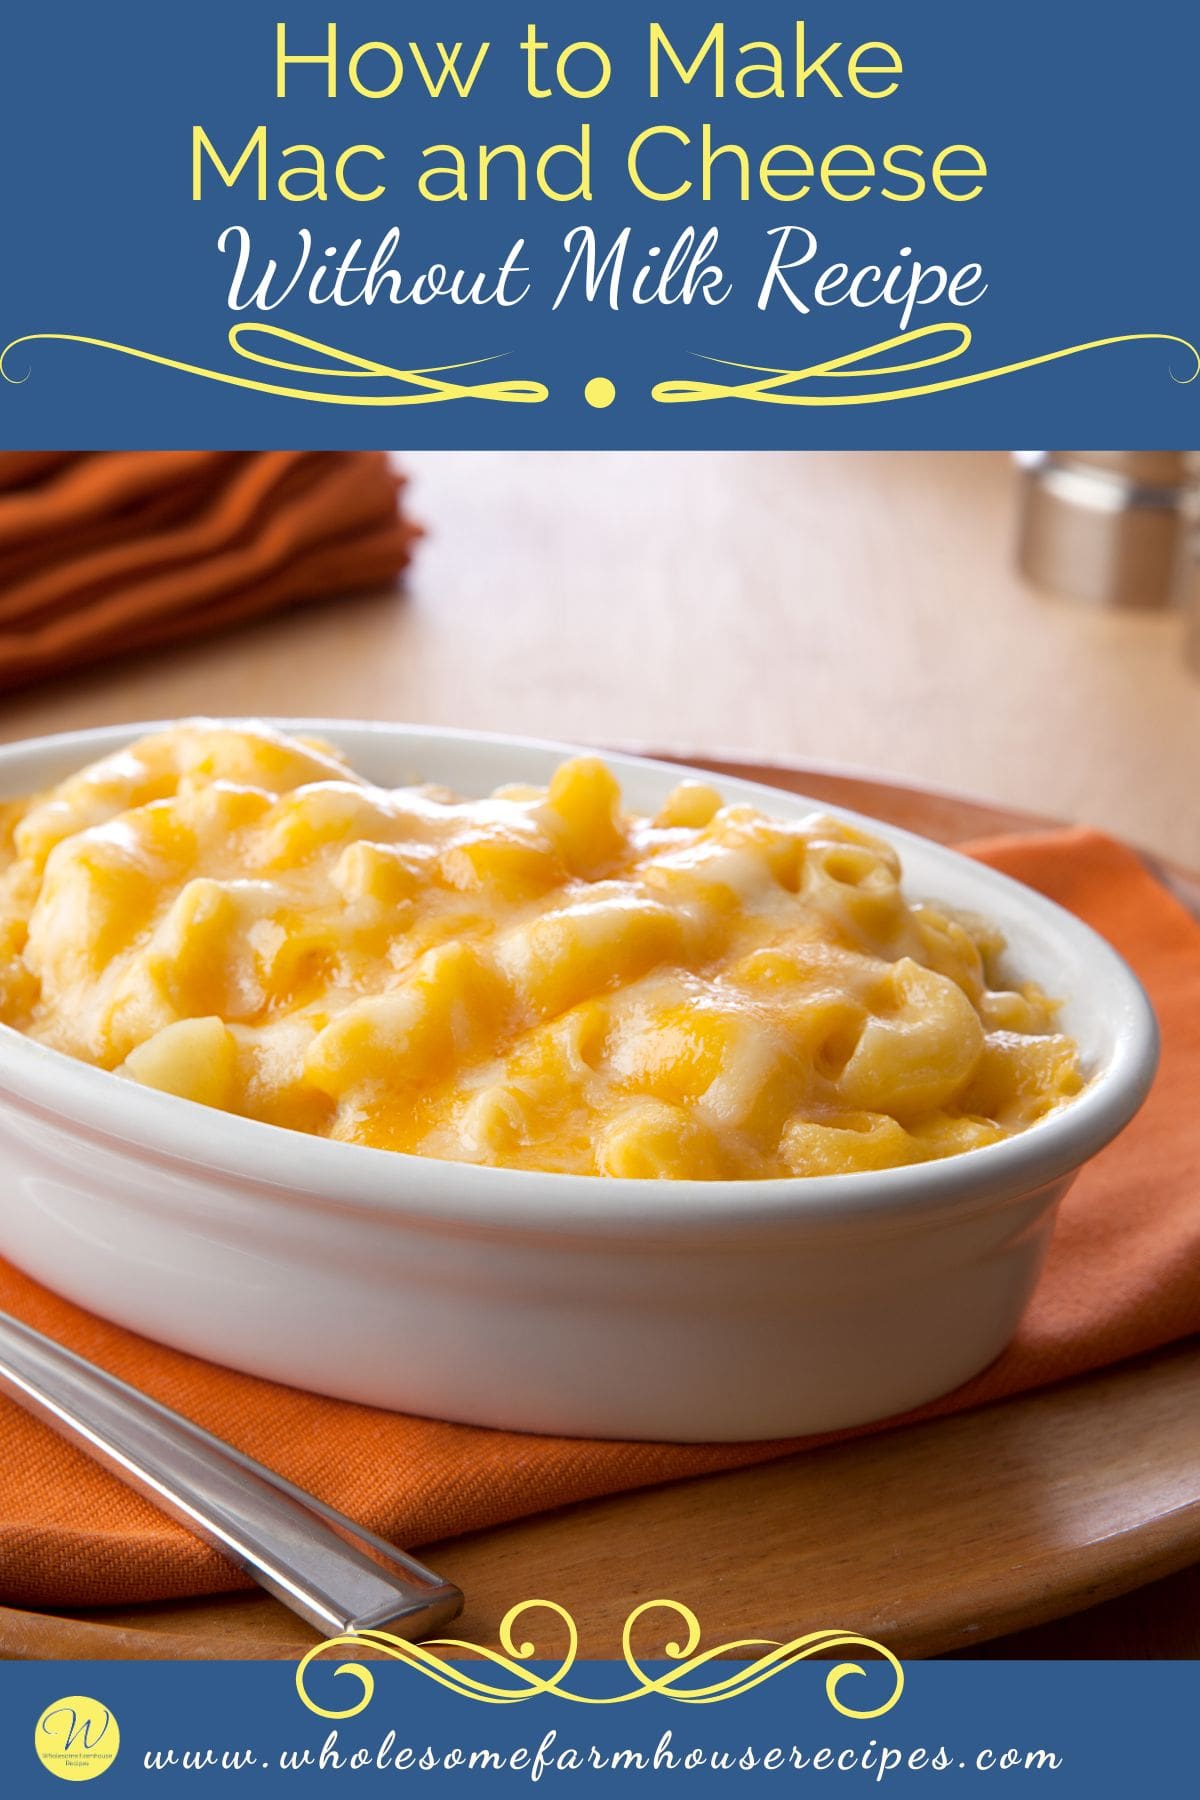 How to Make Mac and Cheese Without Milk Recipe